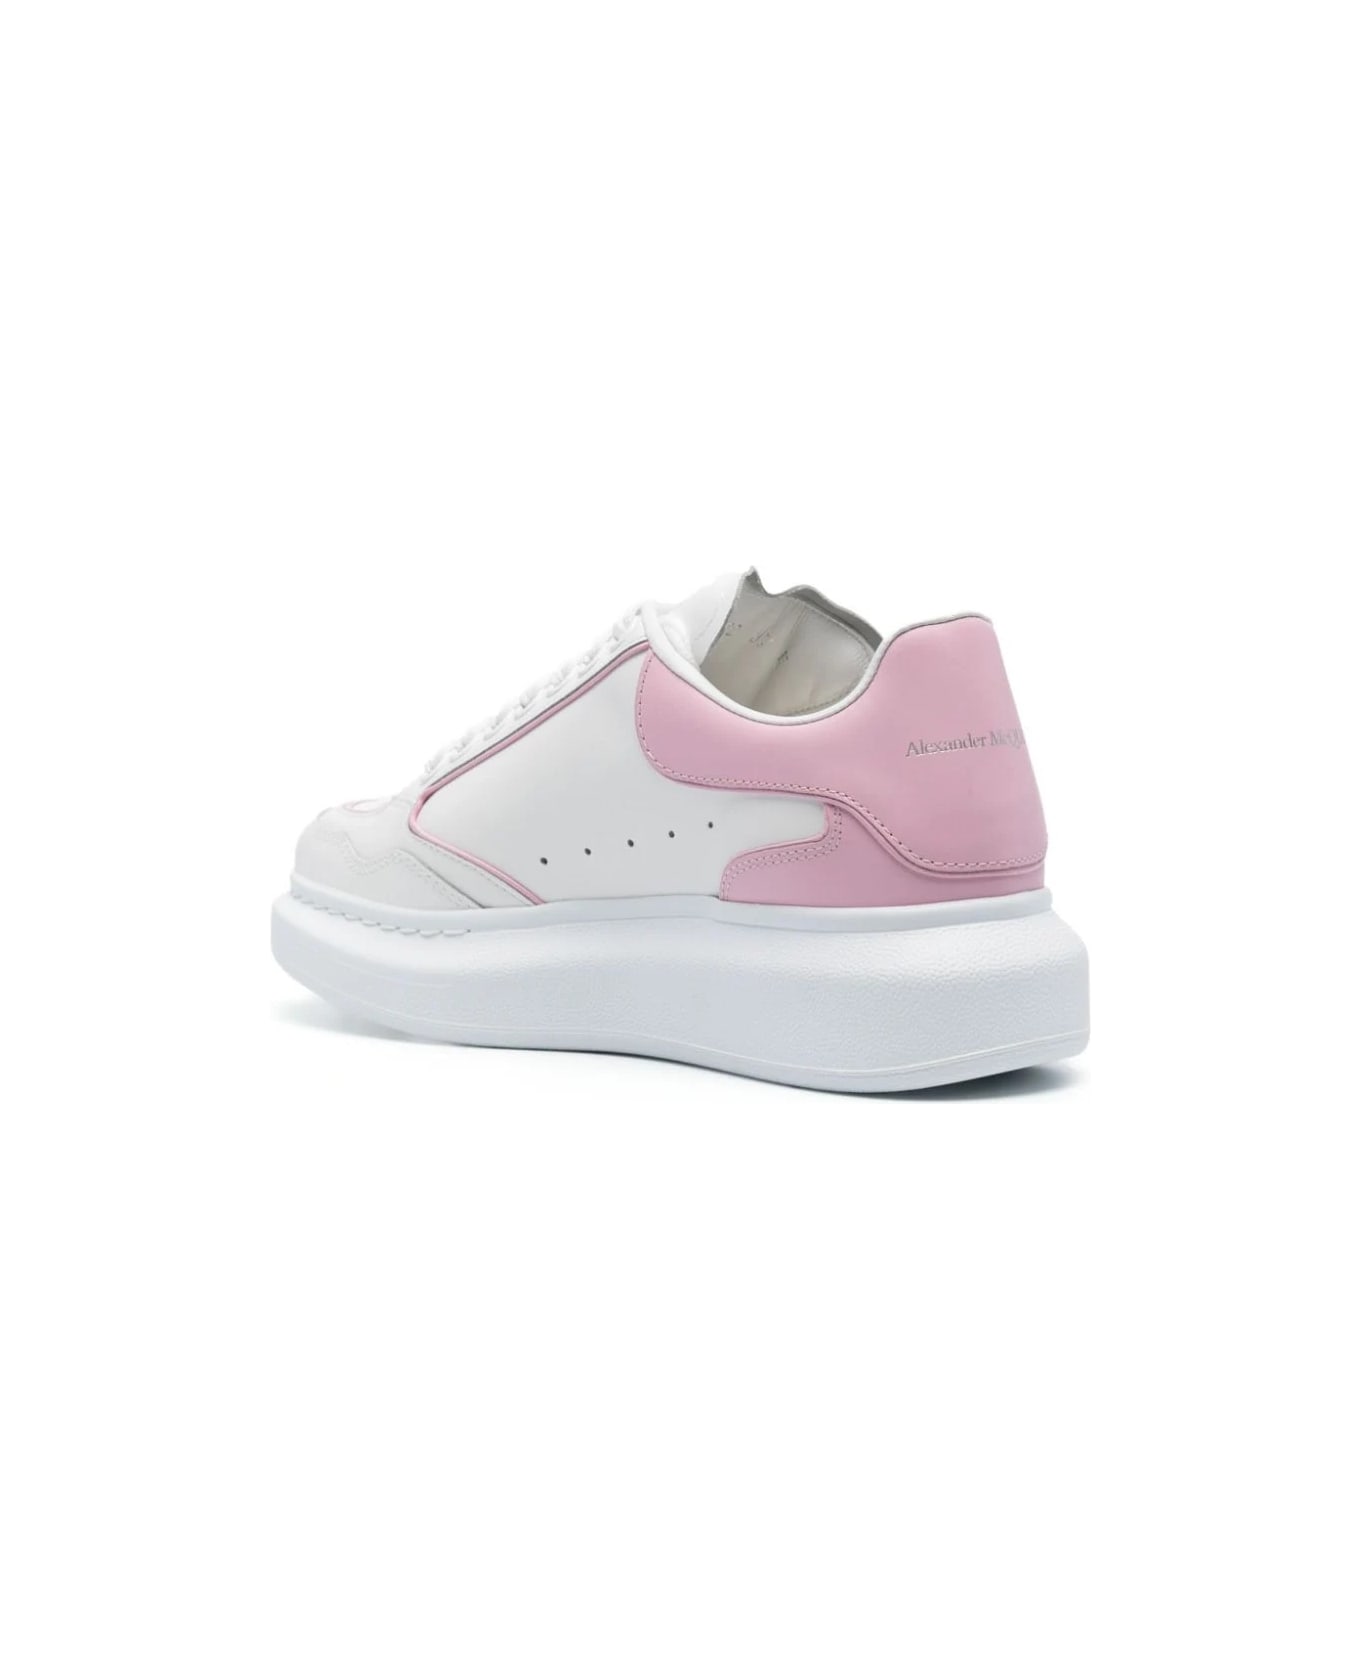 Alexander McQueen White And Pink Oversized Sneakers - White